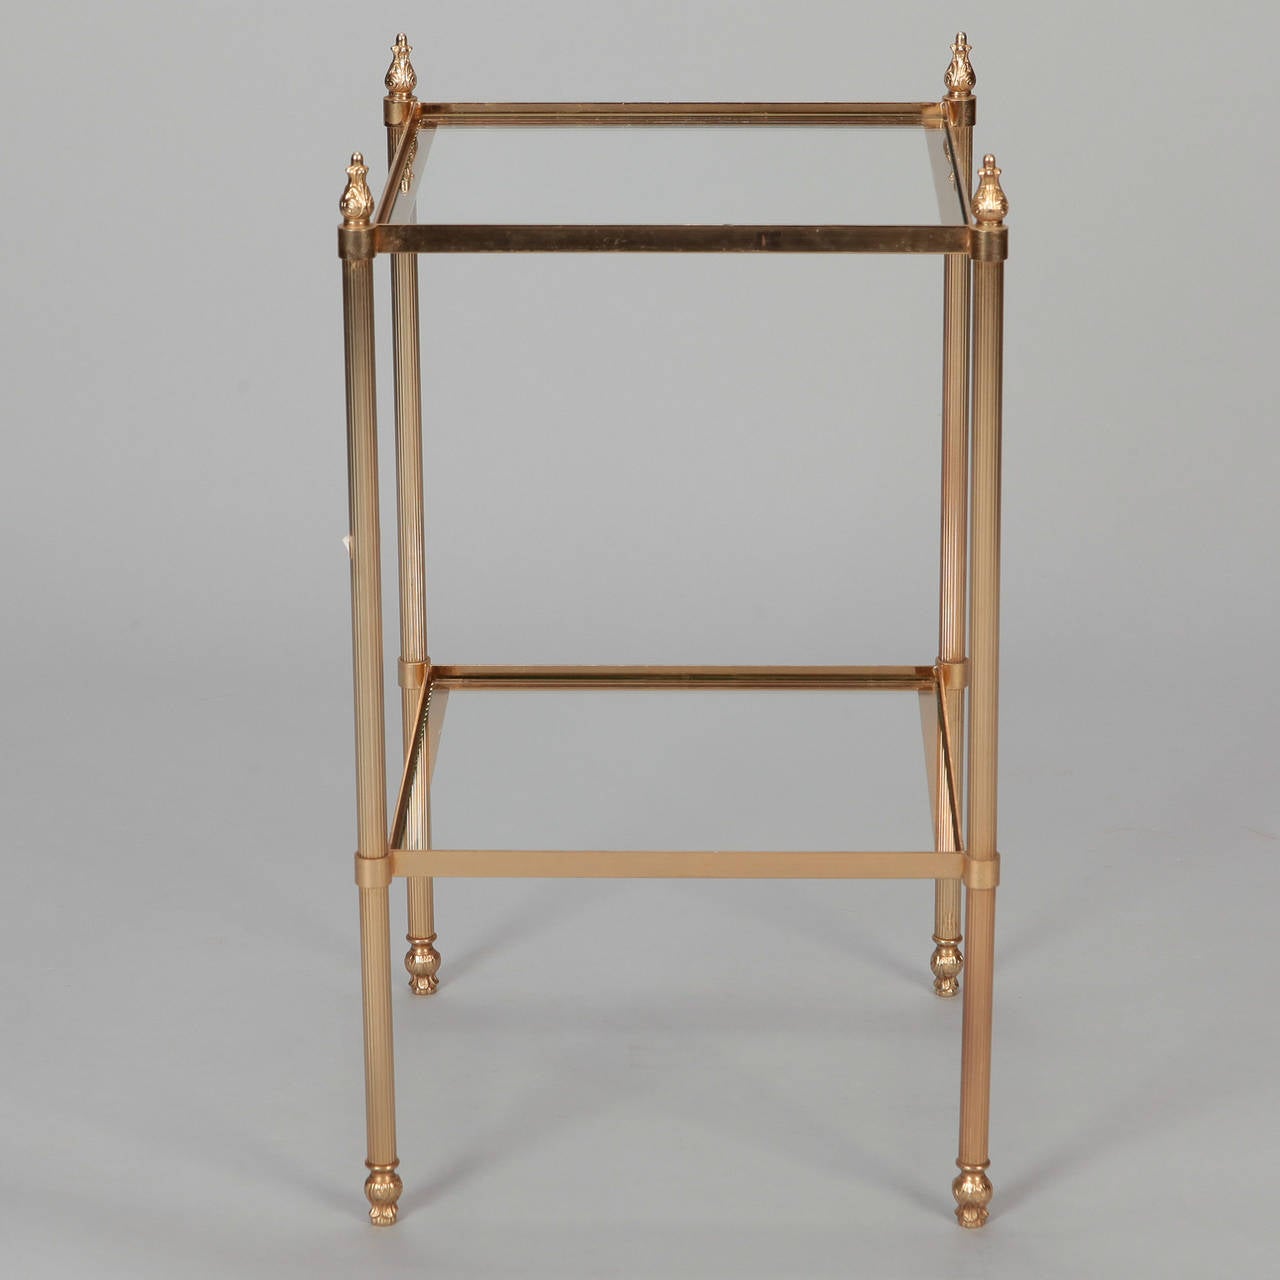 Neoclassical brass and glass two-tier side table with sculpted finials, circa 1960s.